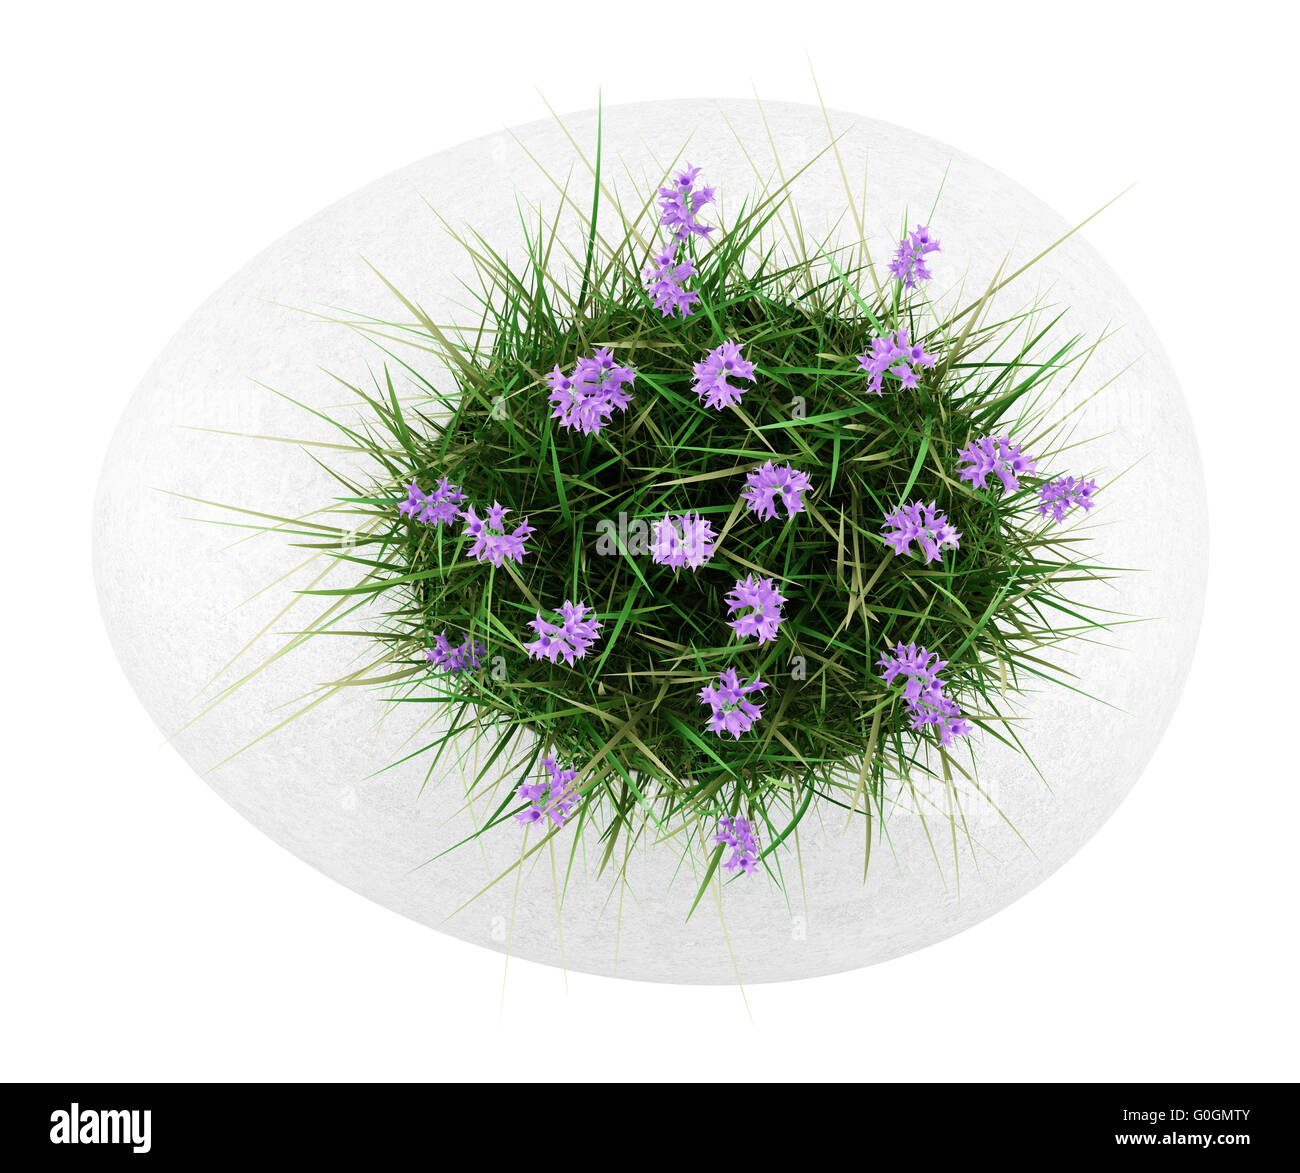 top view of flowers with grass in concrete pot isolated on white background Stock Photo